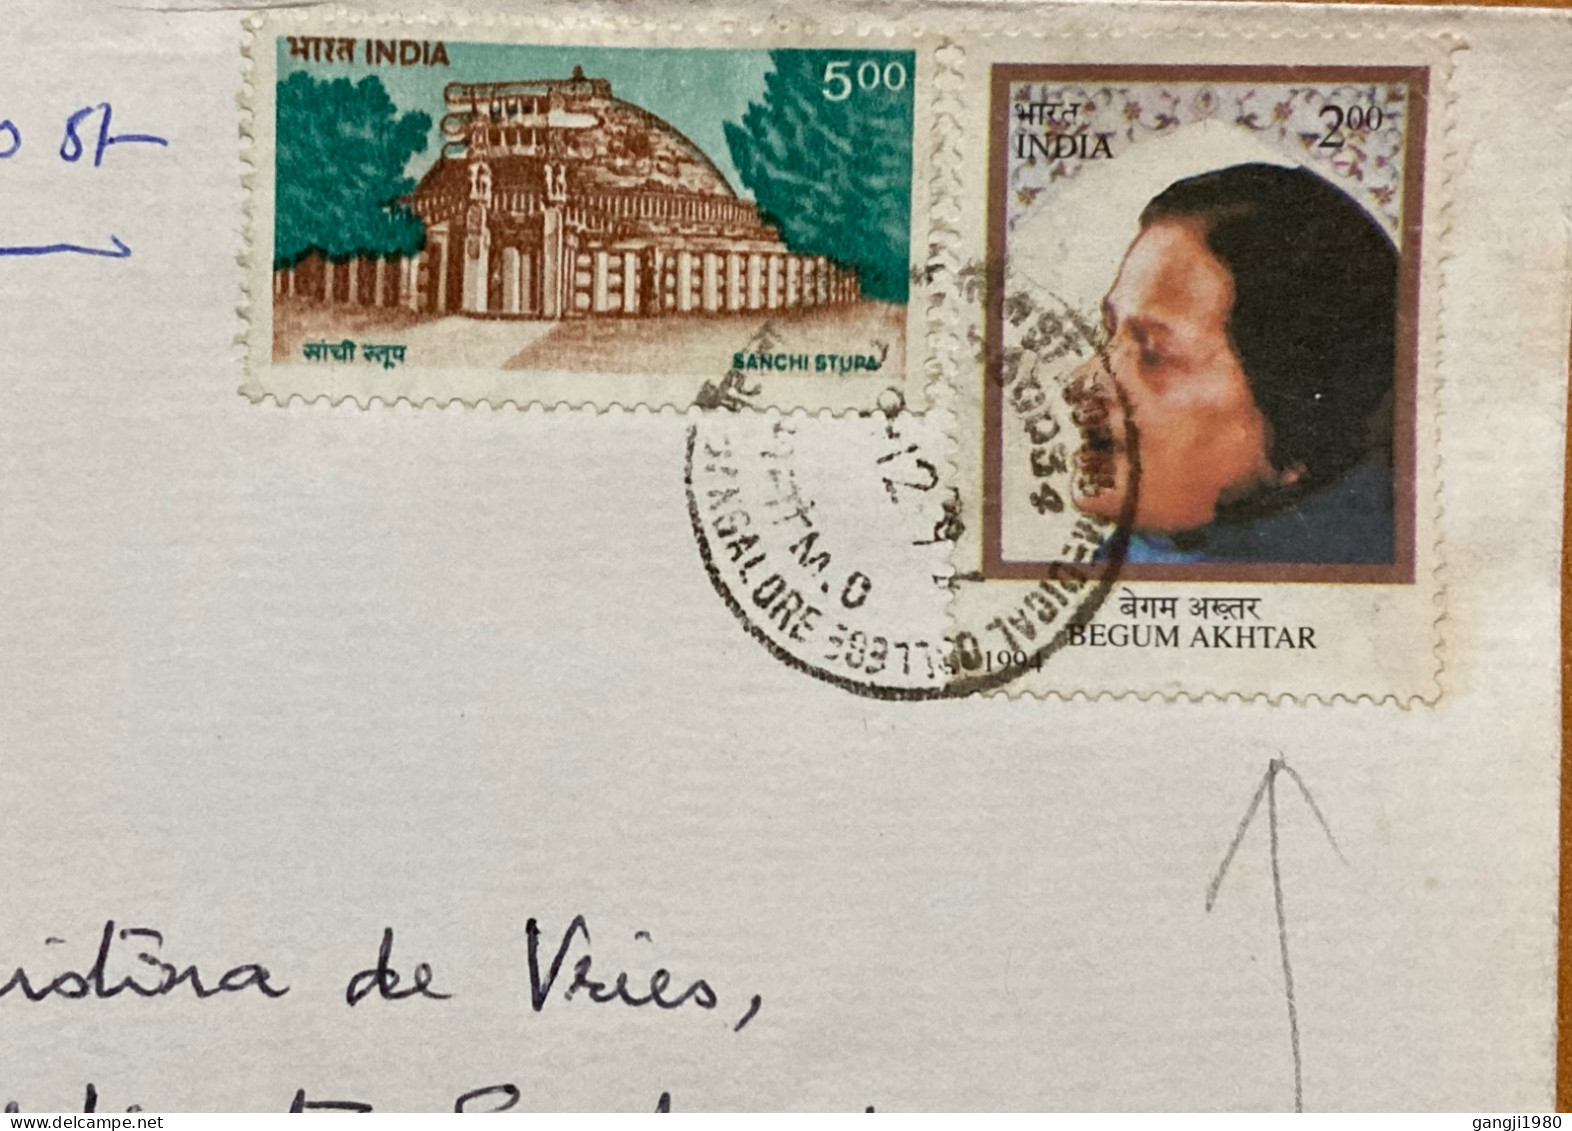 INDIA 1994, COVER USED TO NETHERLANDS, WITHDRAWN STAMP BEGUM AKHTAR, & SANCHI STUPA, RARE USE ON COVER, BANGALORE CITY C - Lettres & Documents